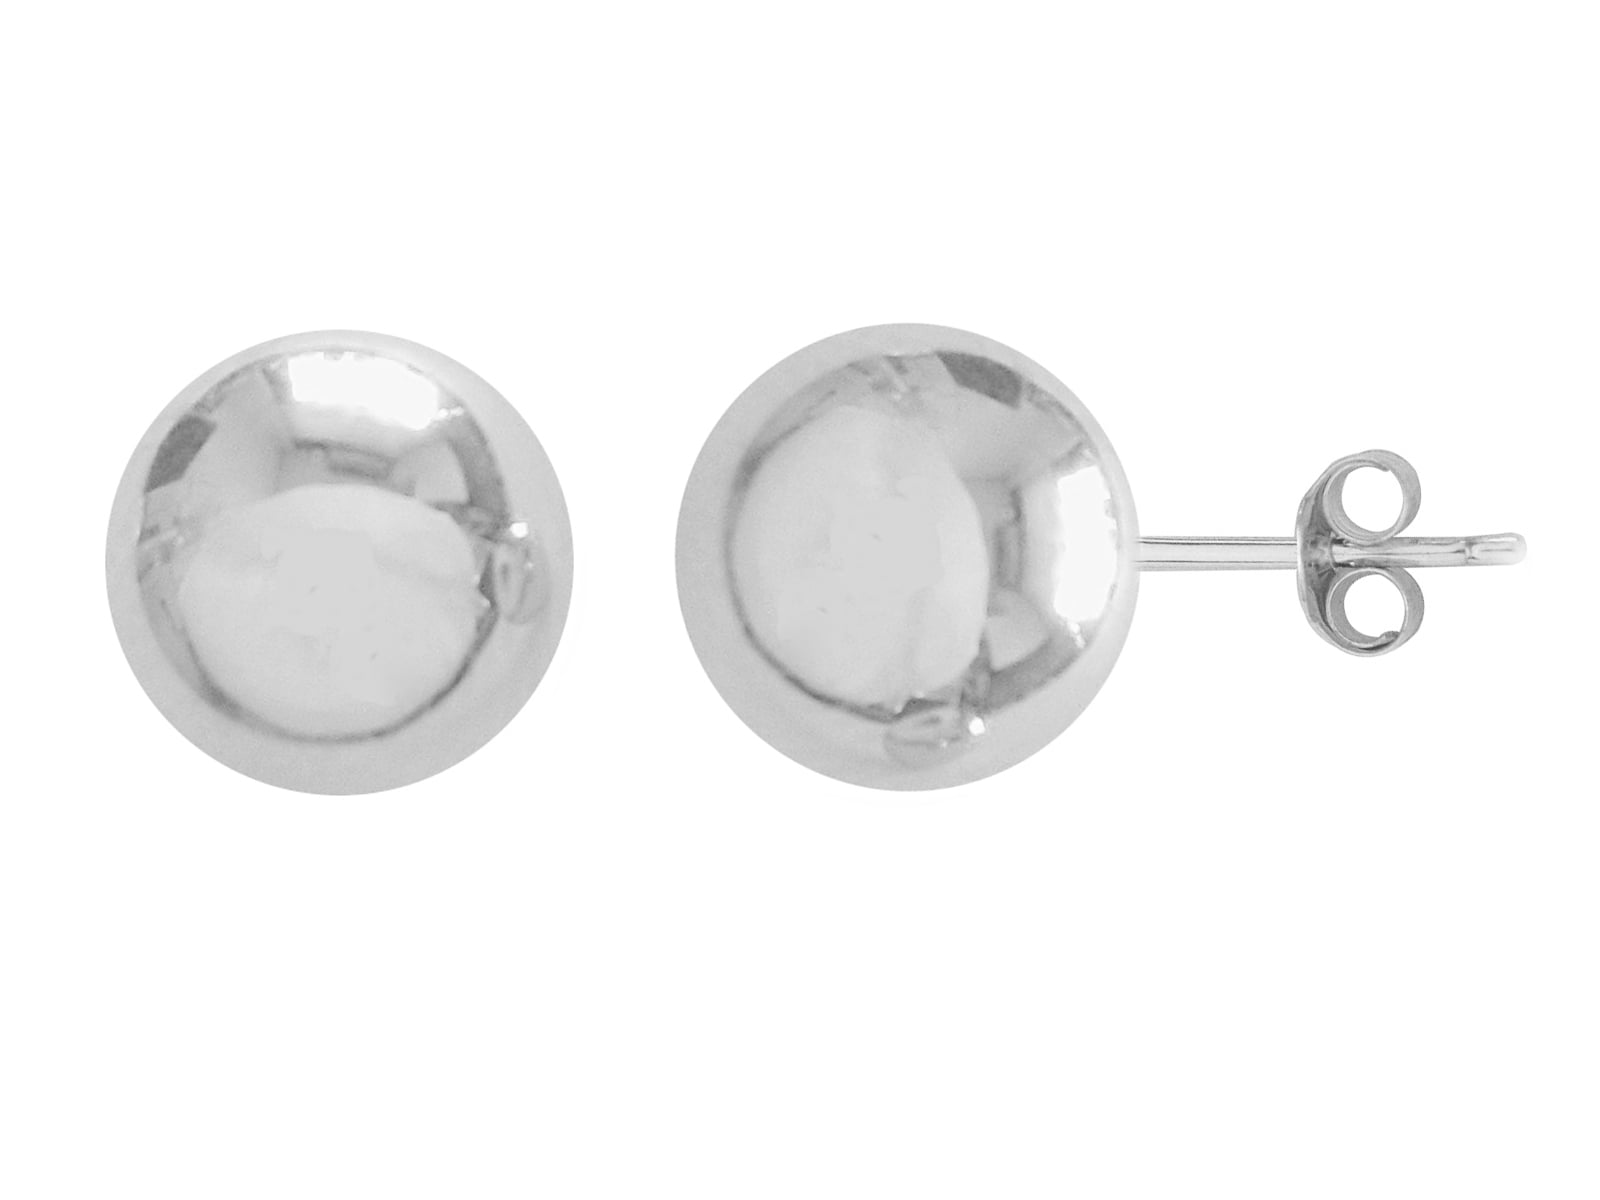 Safety Push Backs Classic Sterling Silver Shiny 10mm Ball Stud Earrings 